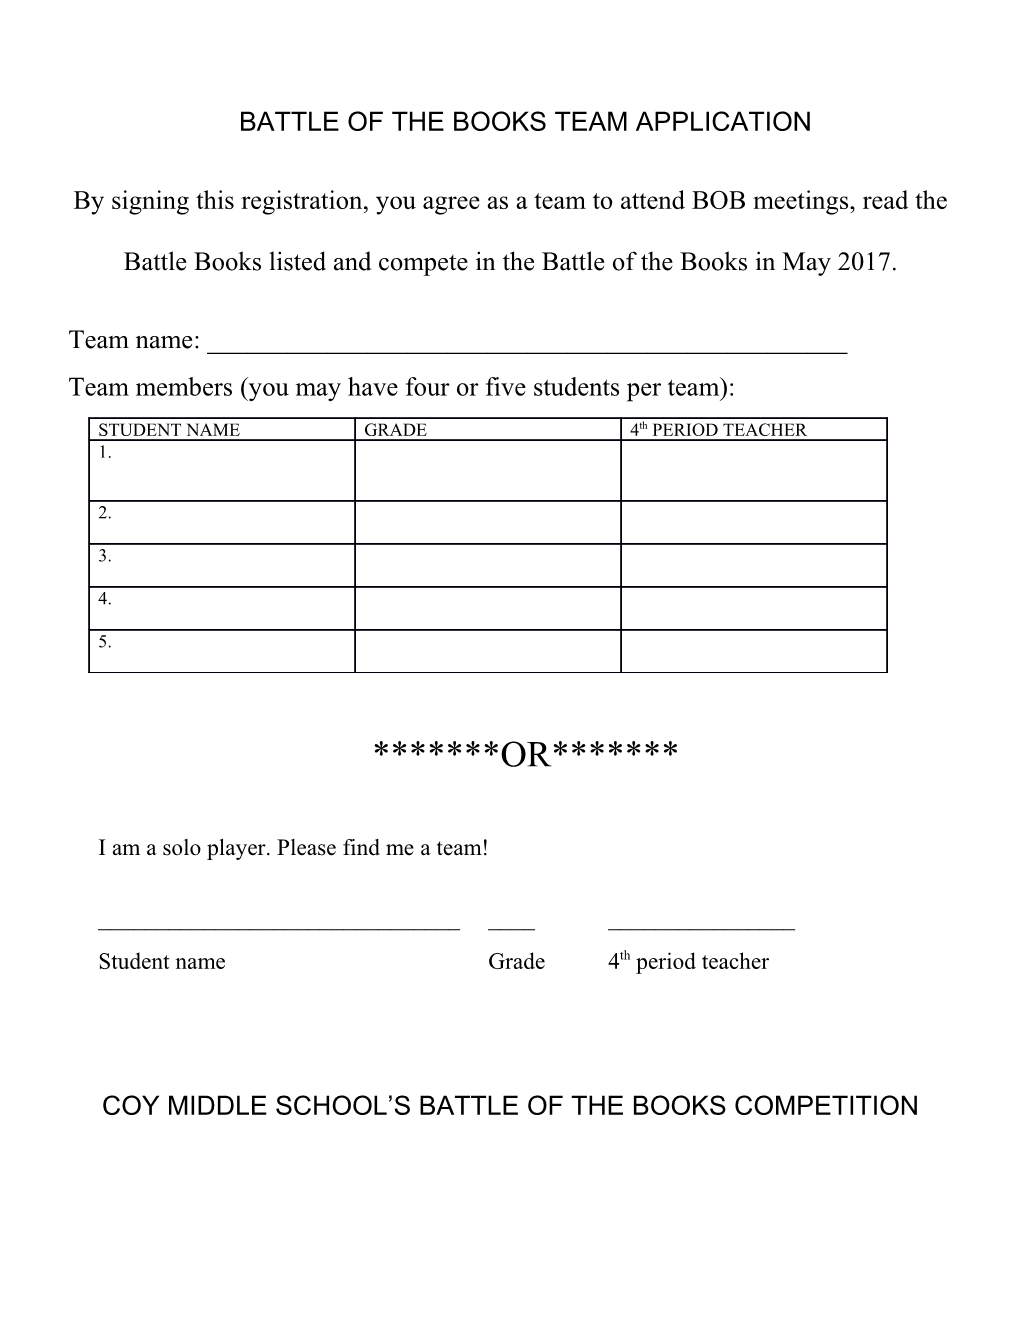 Battle of the Books Team Application